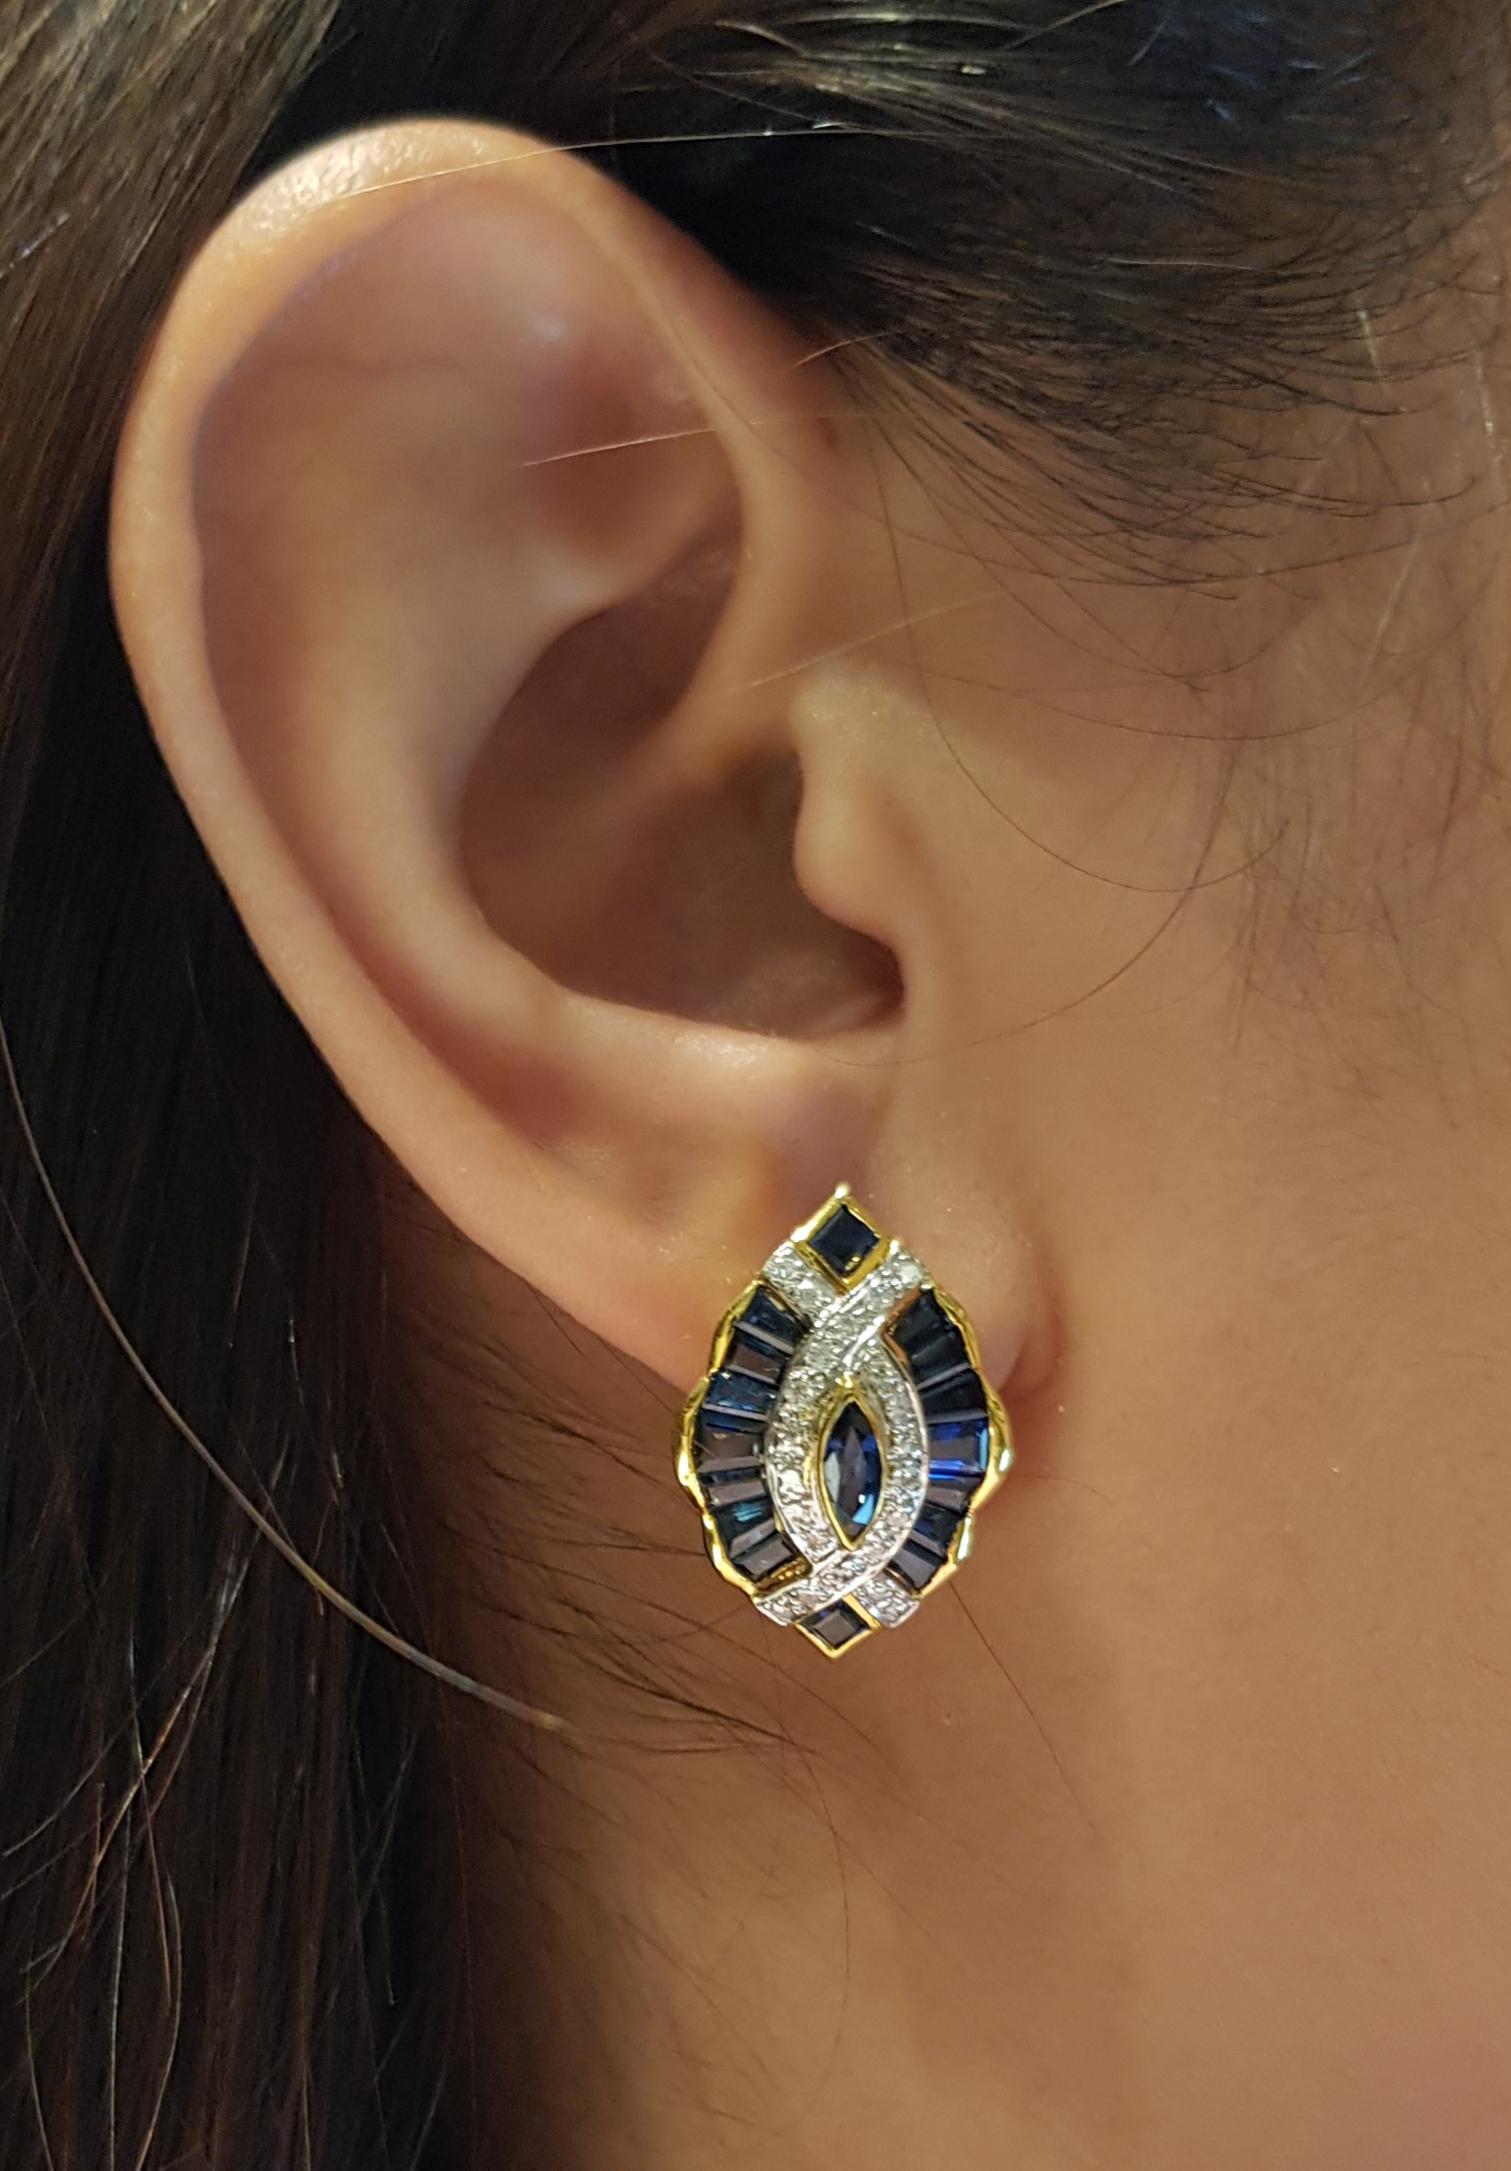 Blue Sapphire 4.17 carats with Diamond 0.34 carat Earrings set in 18 Karat Gold Settings

Width:  1.5 cm 
Length: 2.3 cm
Total Weight: 11.77 grams

